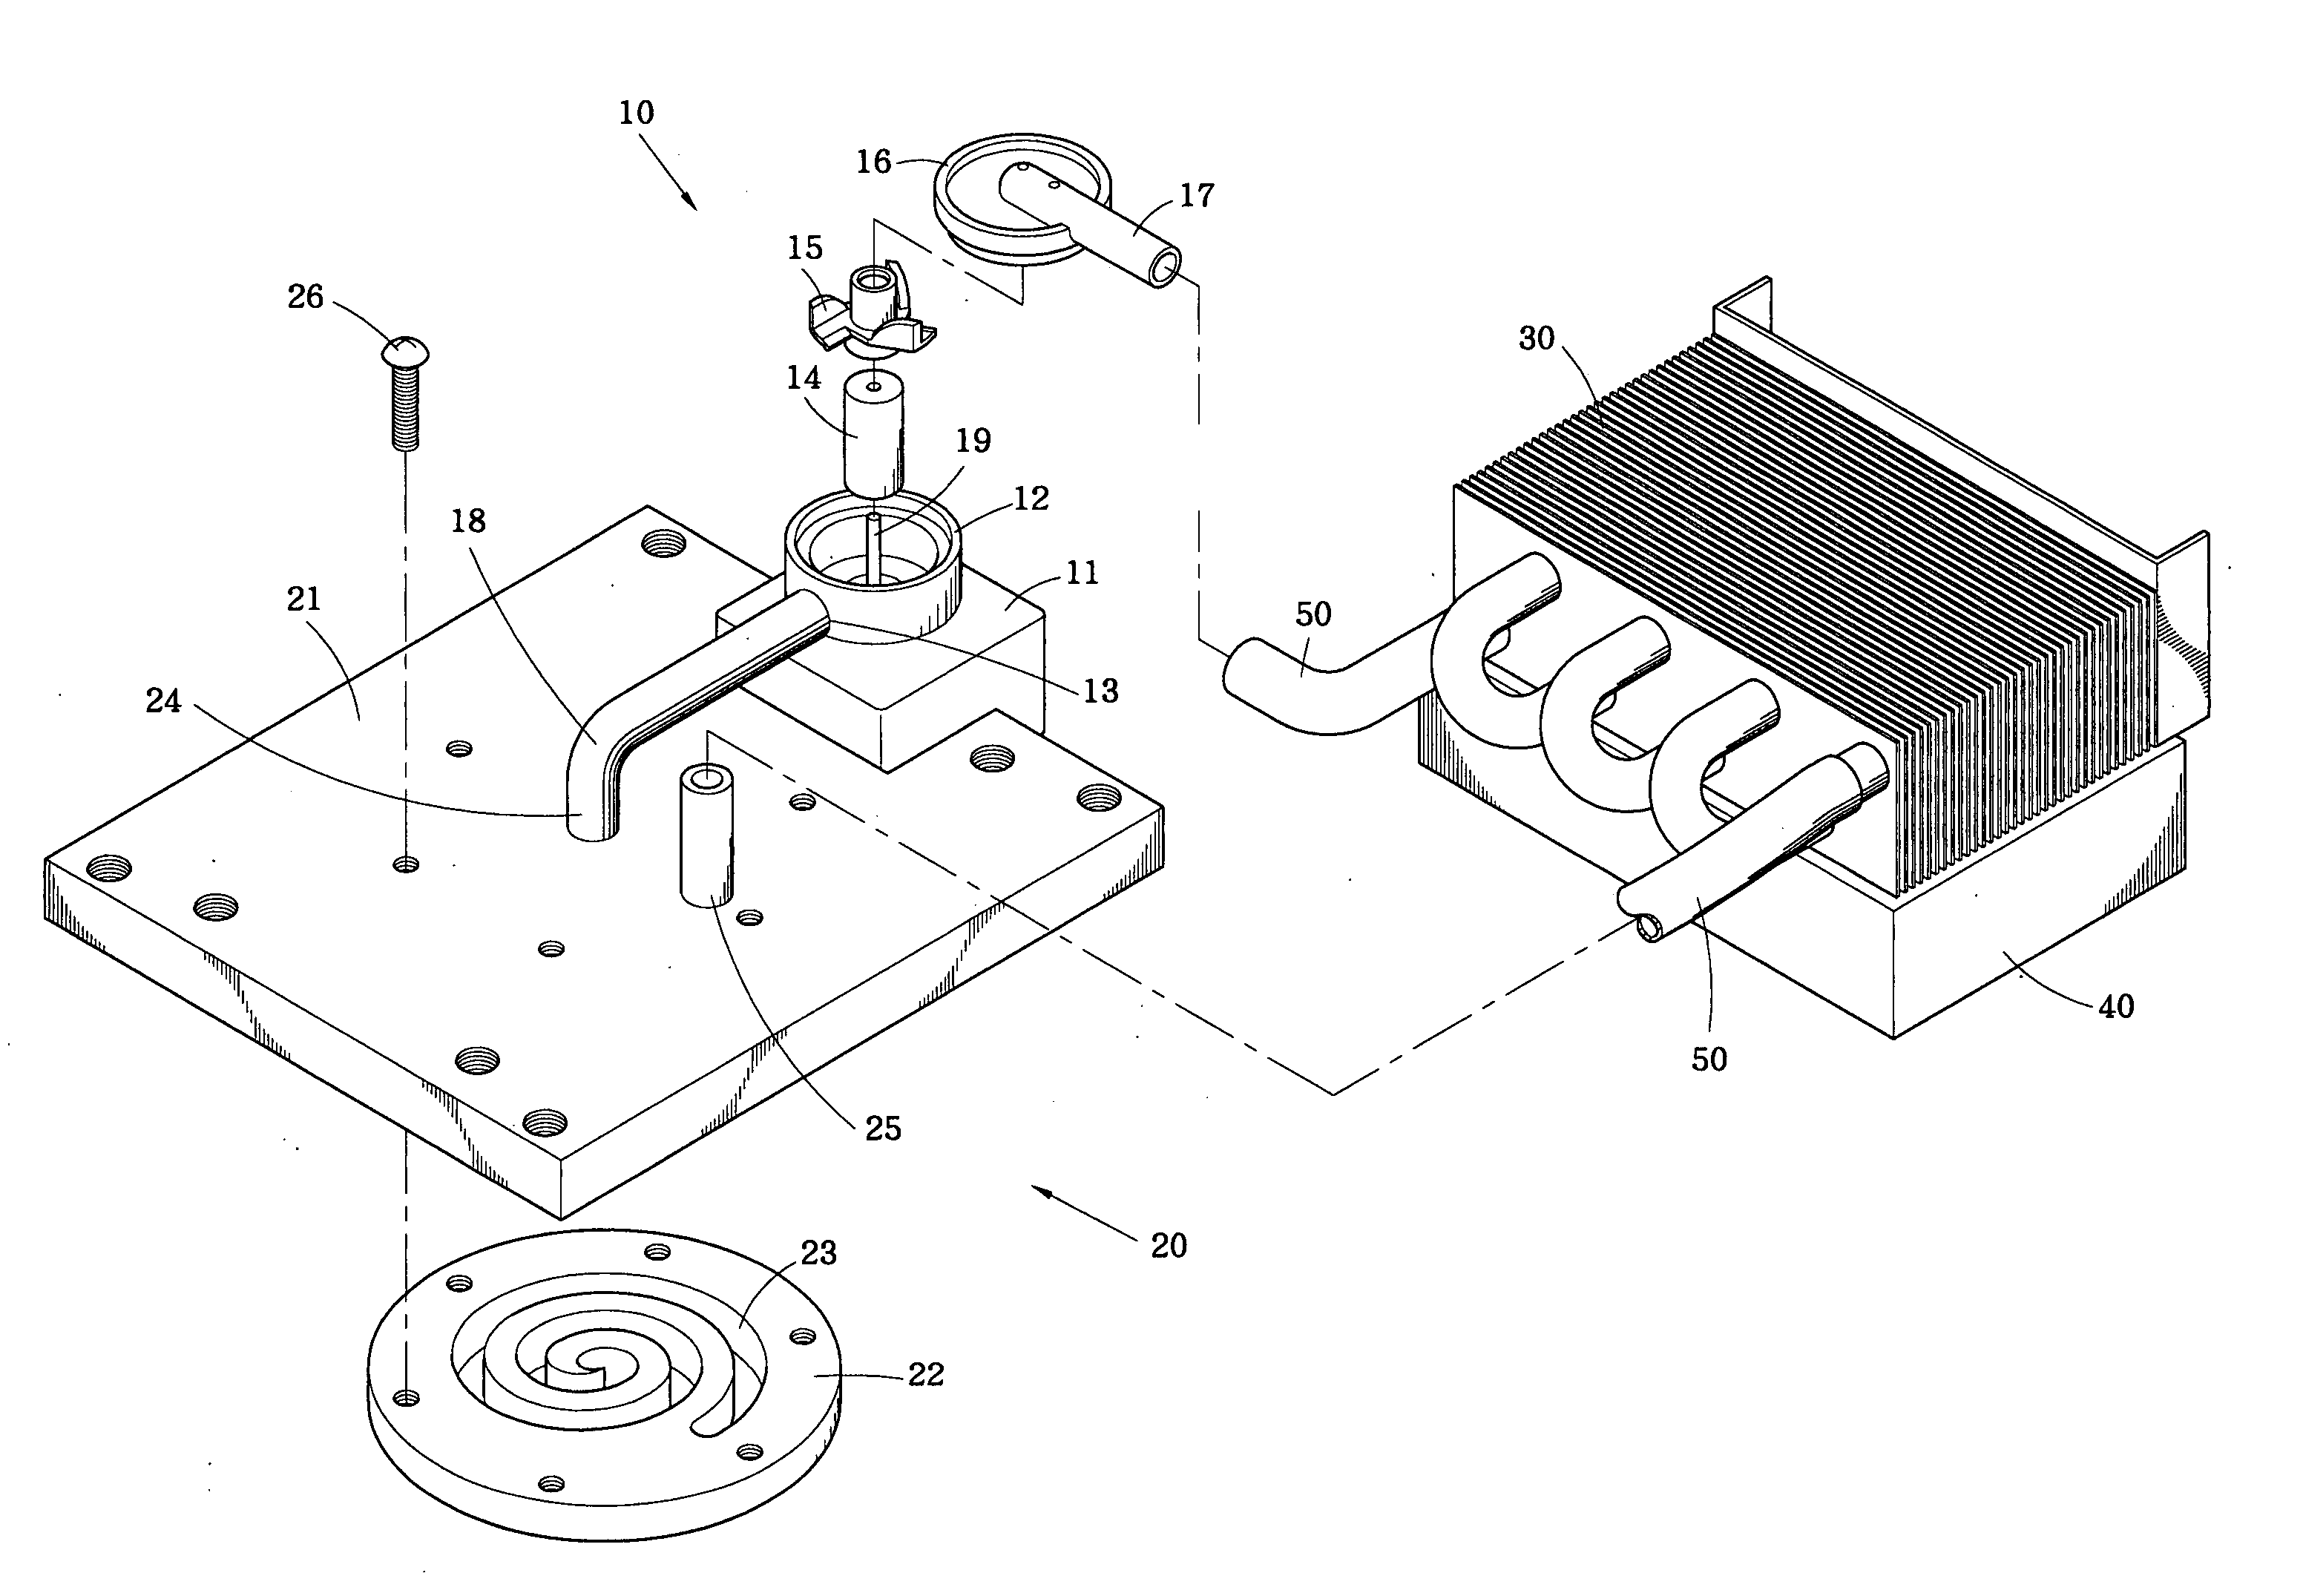 Coolant tray of liquid based cooling device